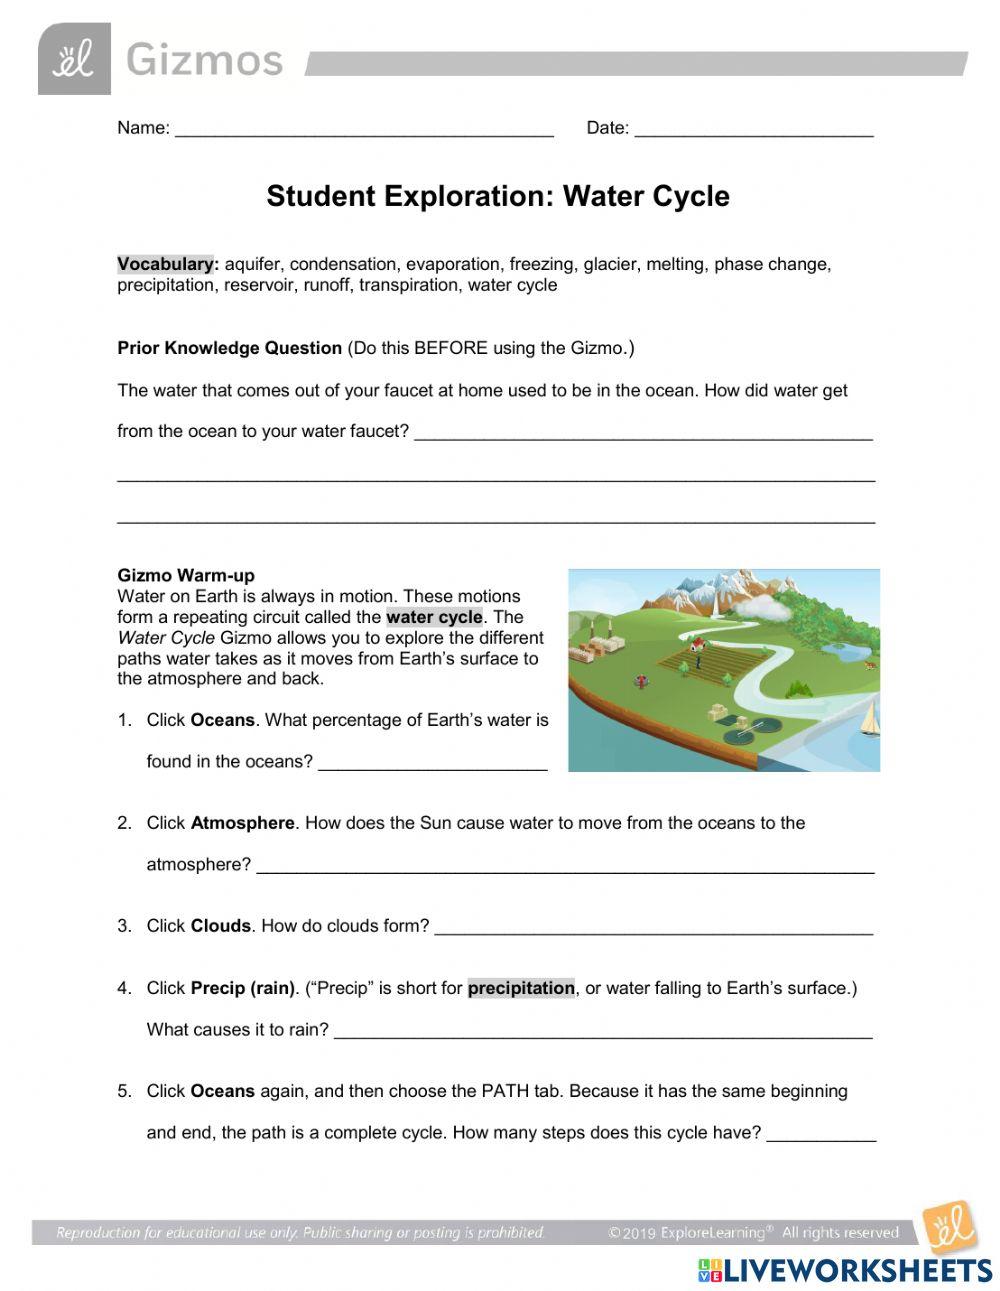 Water Cyle Gizmos Exploration Sheet